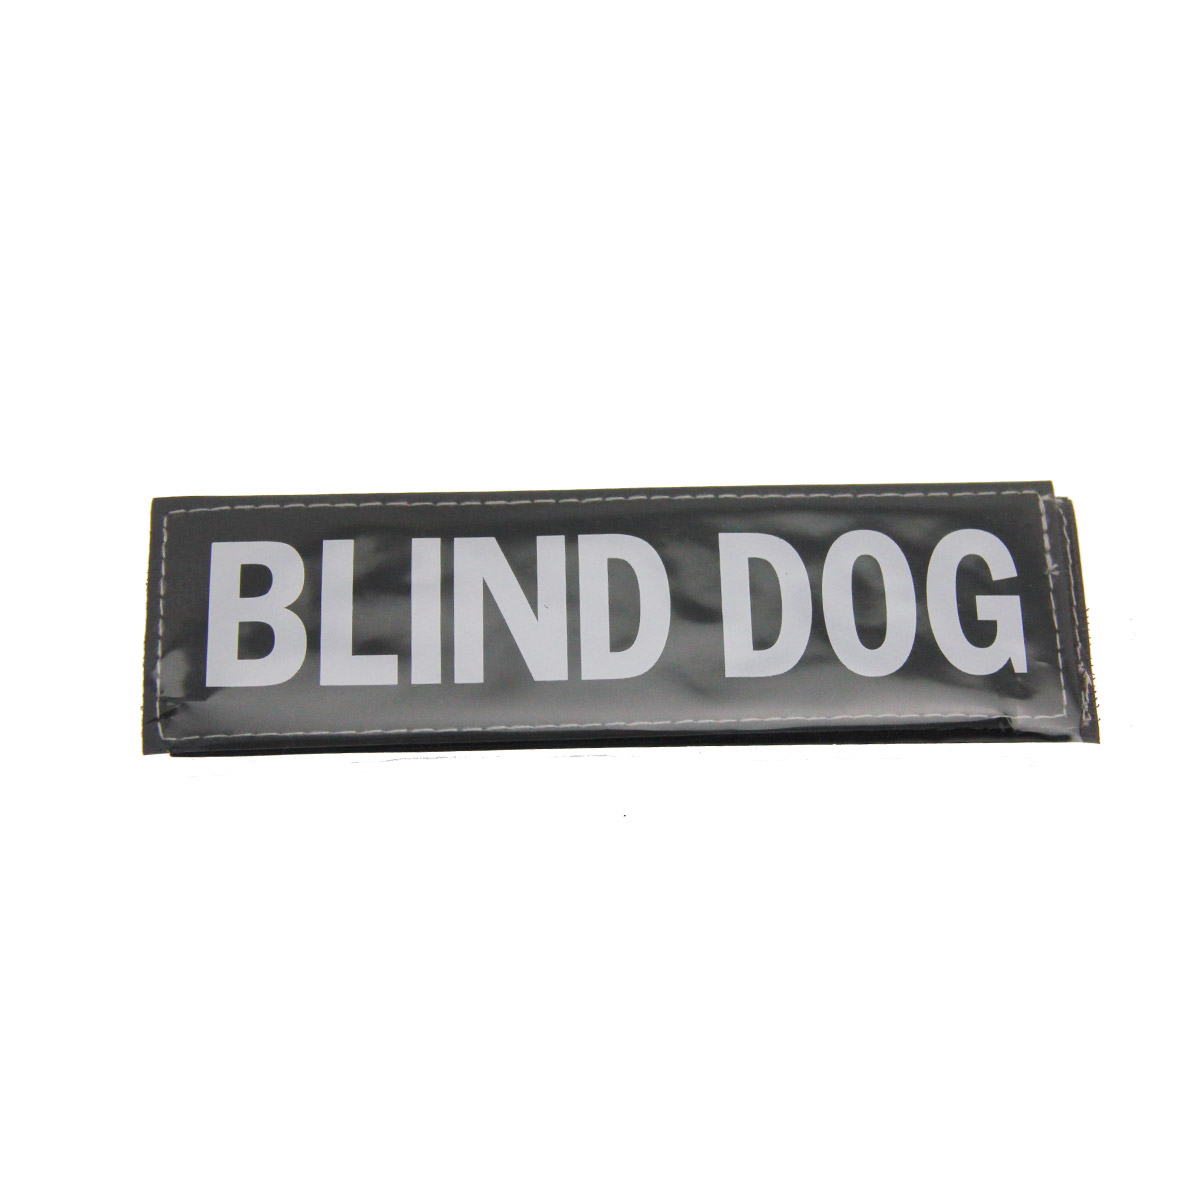 EzyDog Side Patches for Convert Harness - Blind Dog